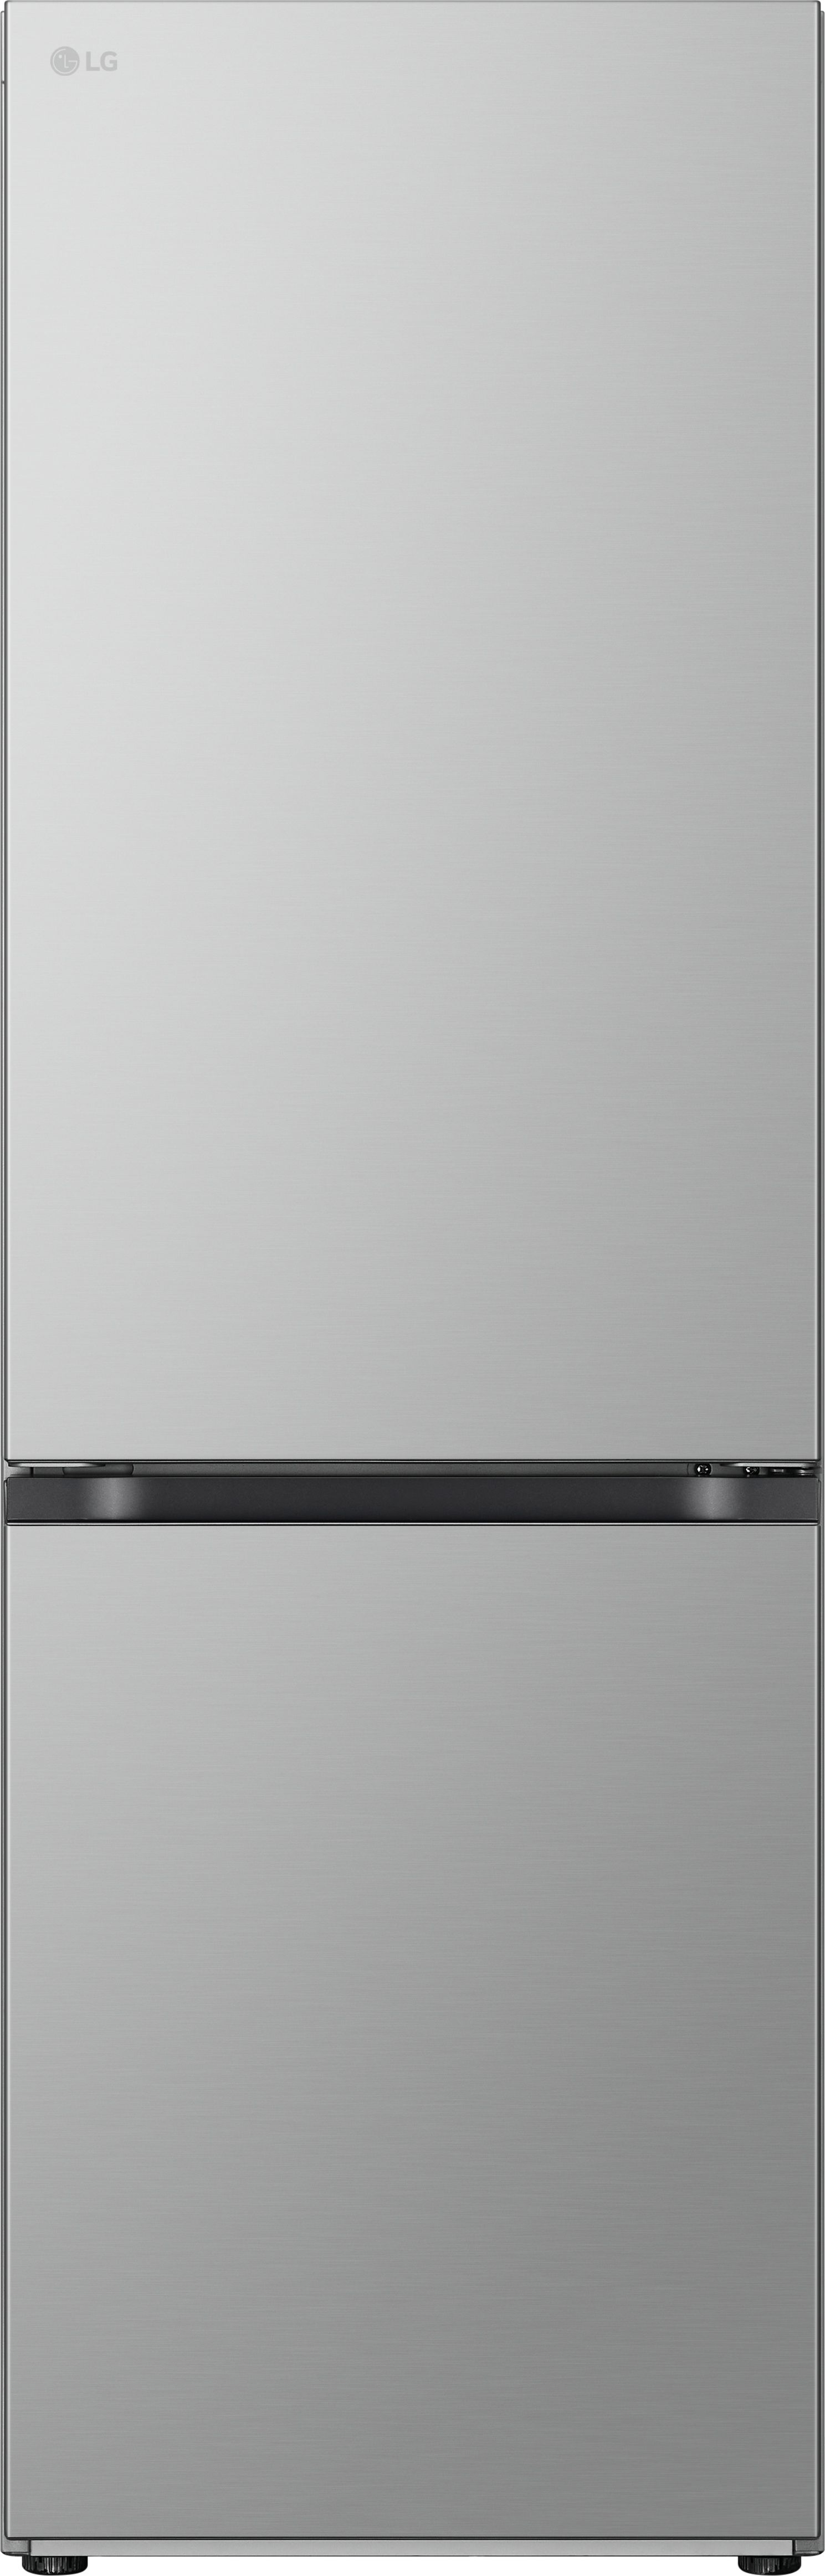 LG NatureFRESH GBV3100DPY 60/40 Frost Free Fridge Freezer - Prime Silver - D Rated, Silver